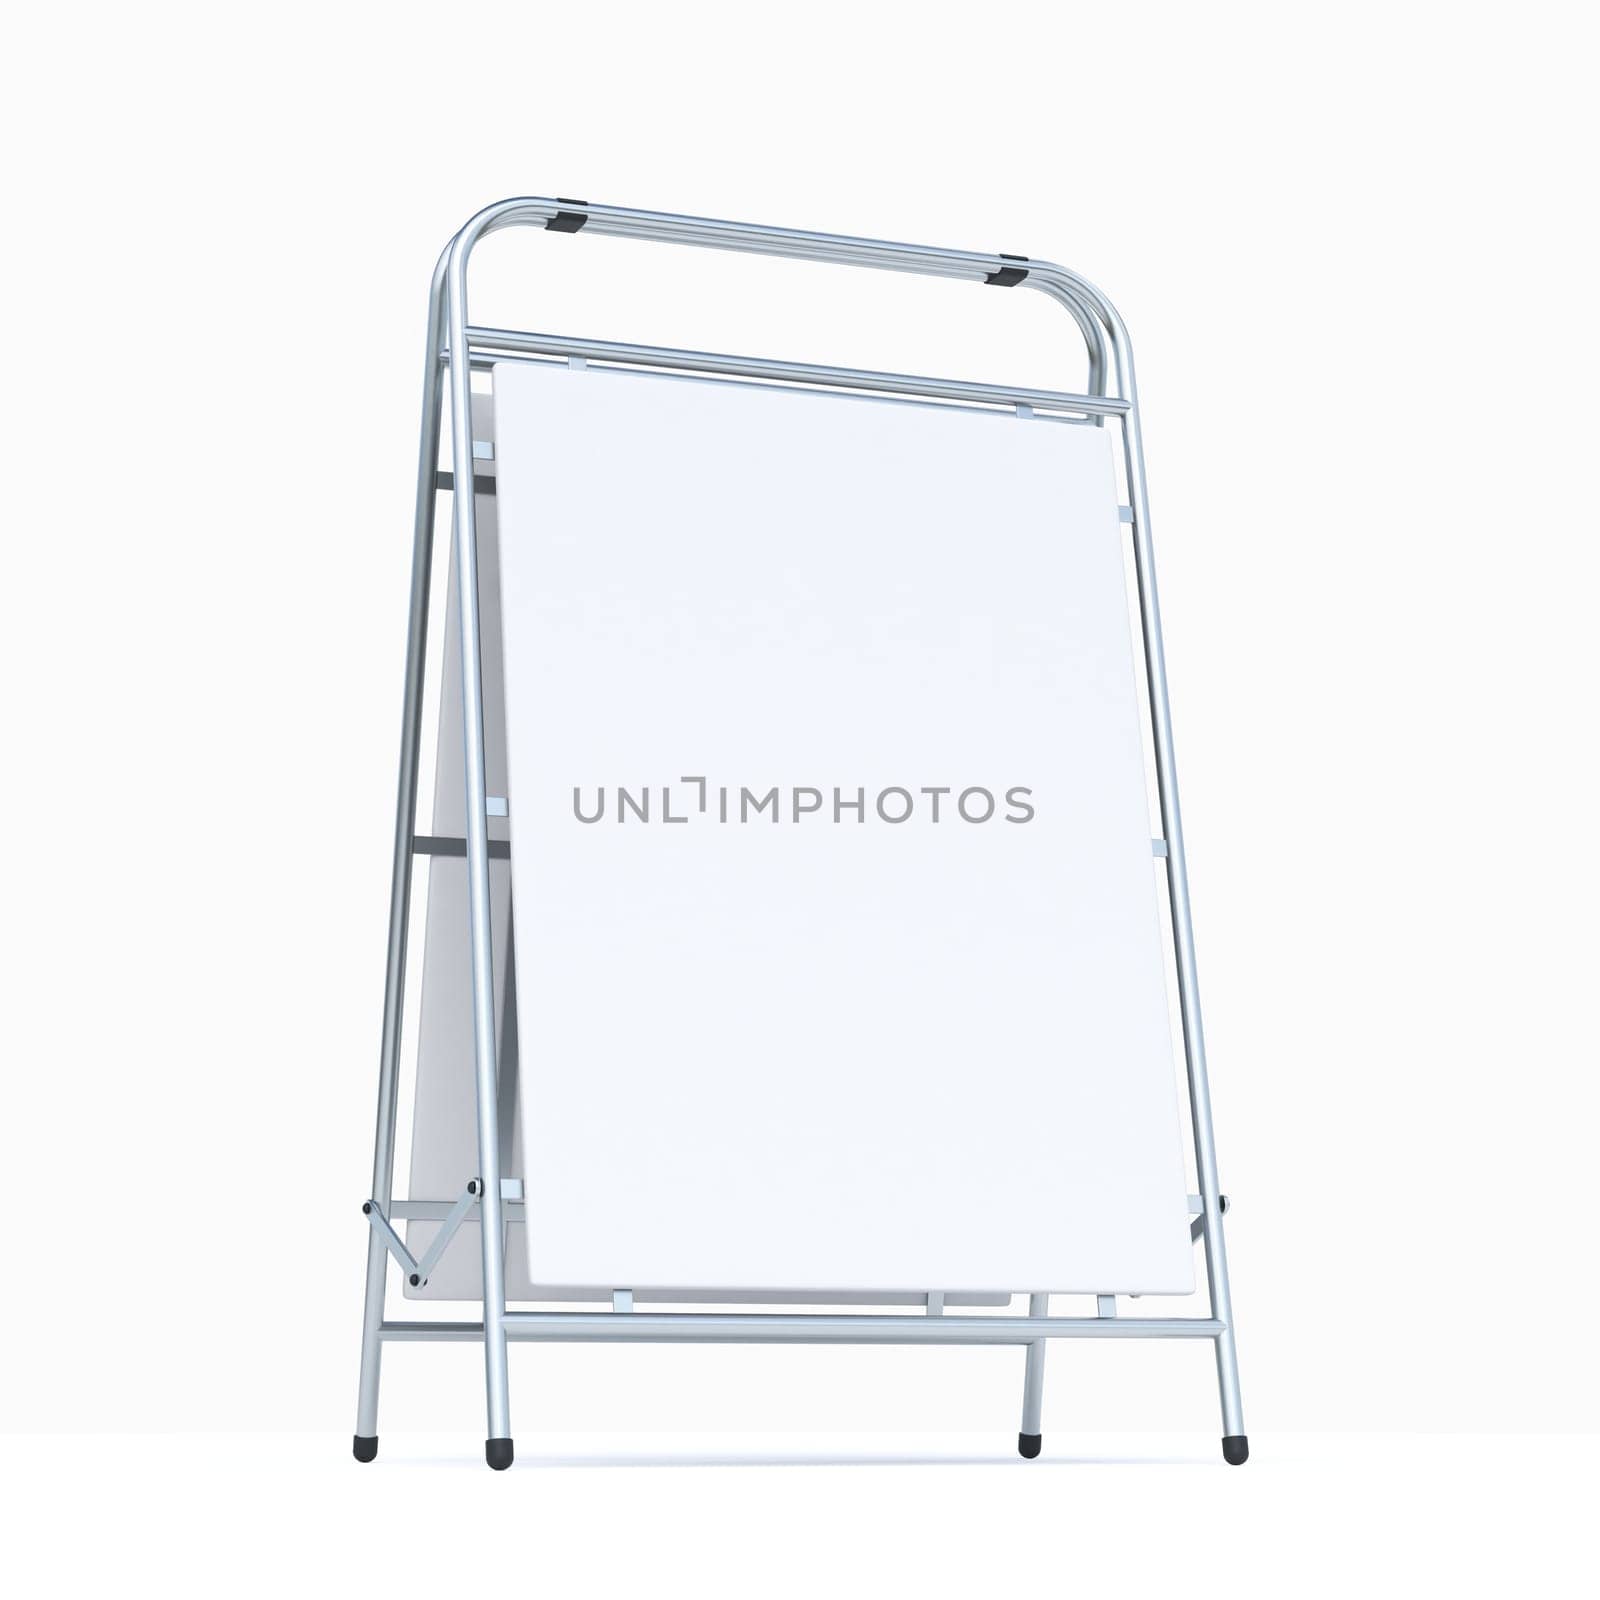 White blank advertising stand 3D rendering illustration isolated on white background